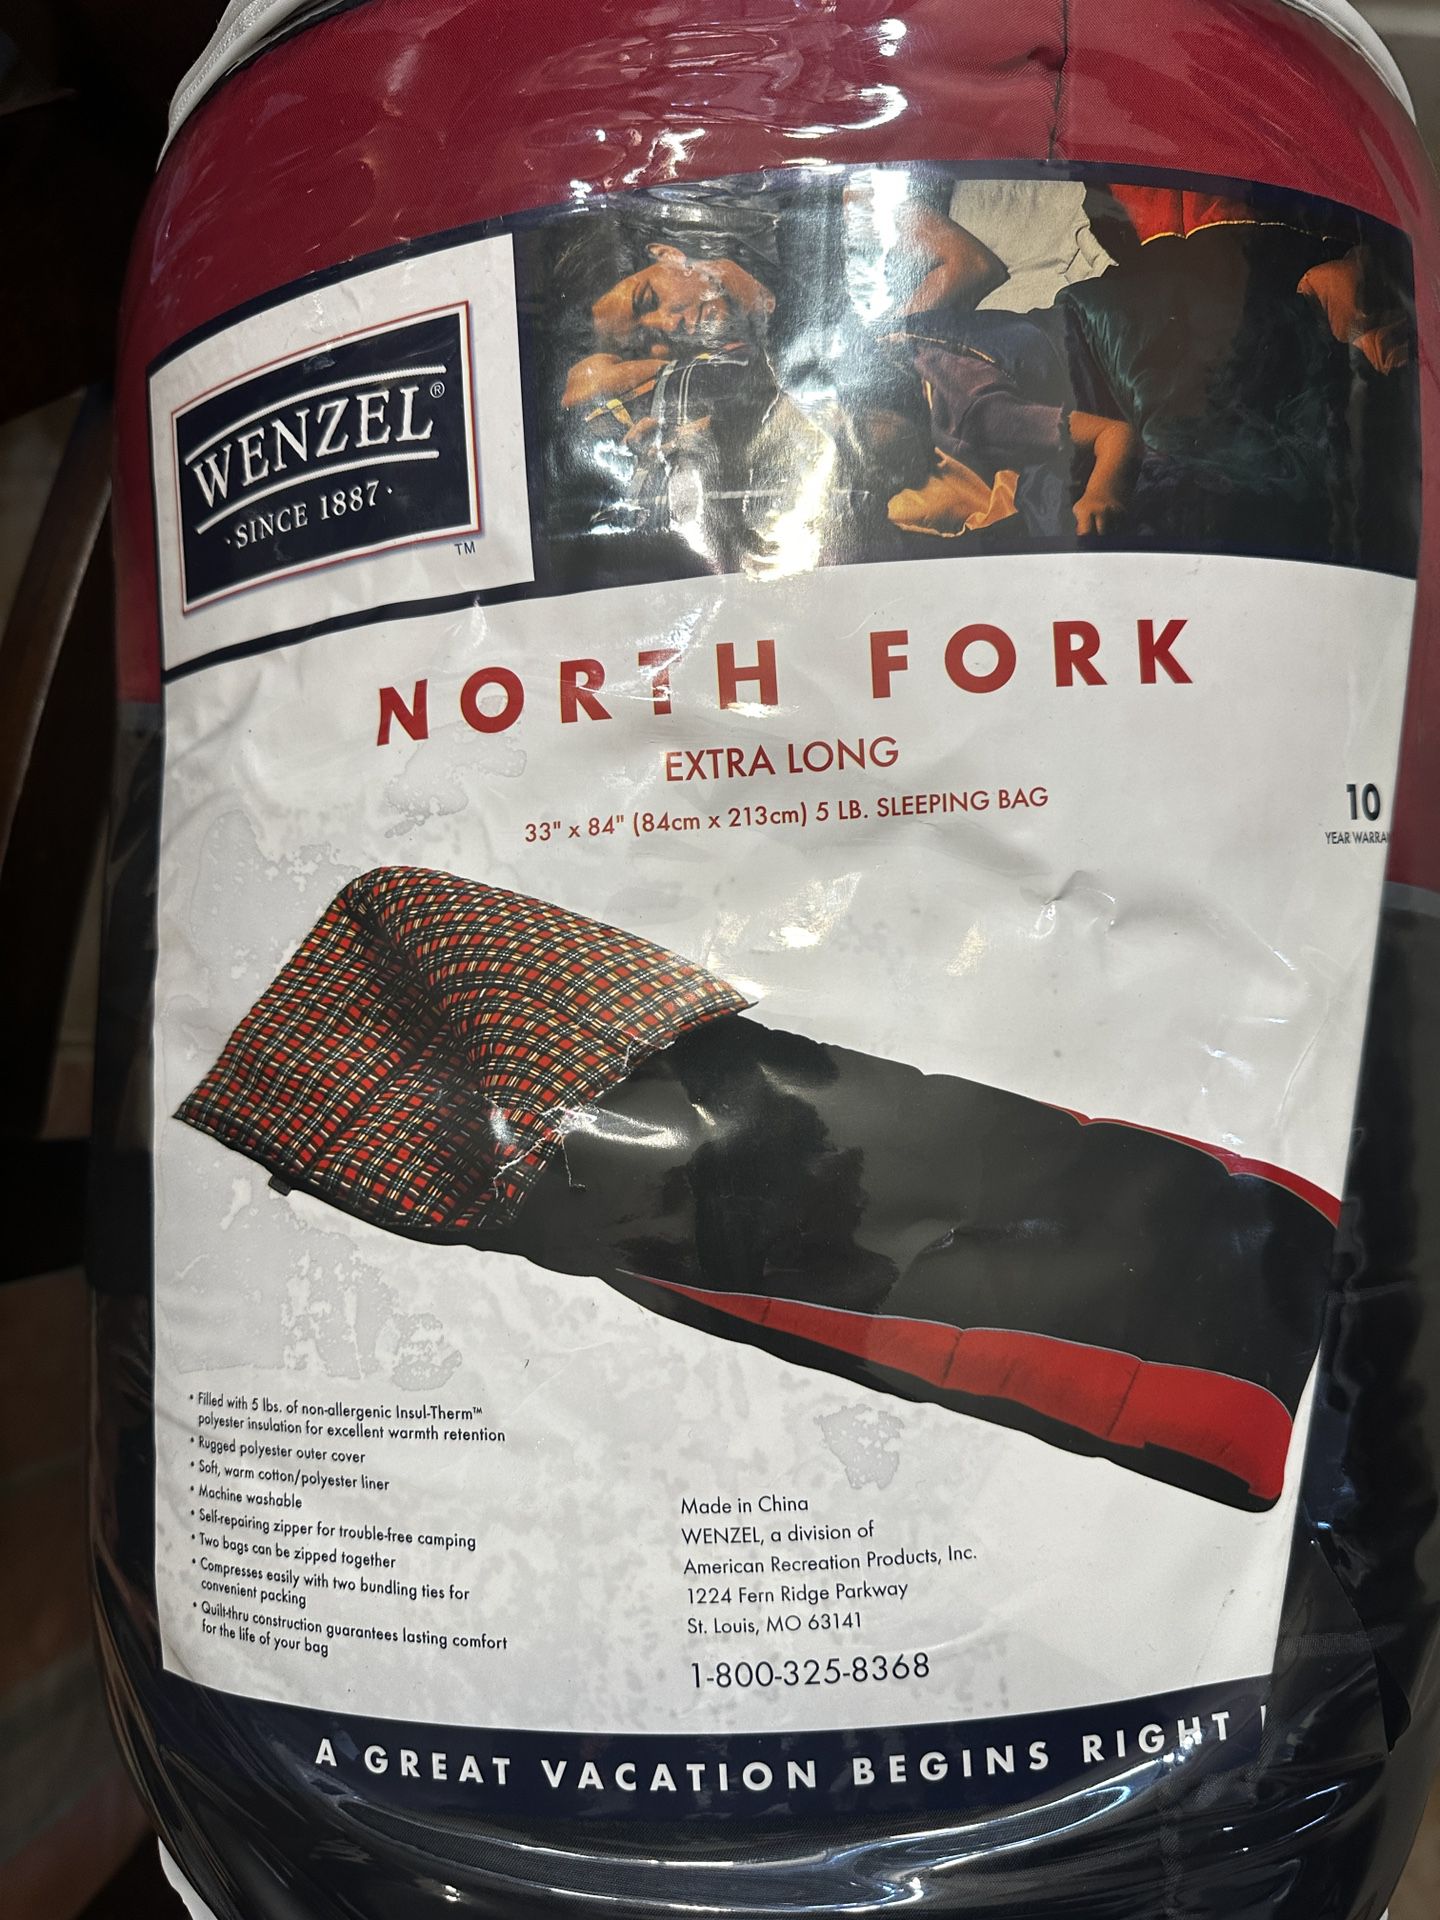 Sleeping Bag Brand New - Extra Long.  North Fork By Wenzel 